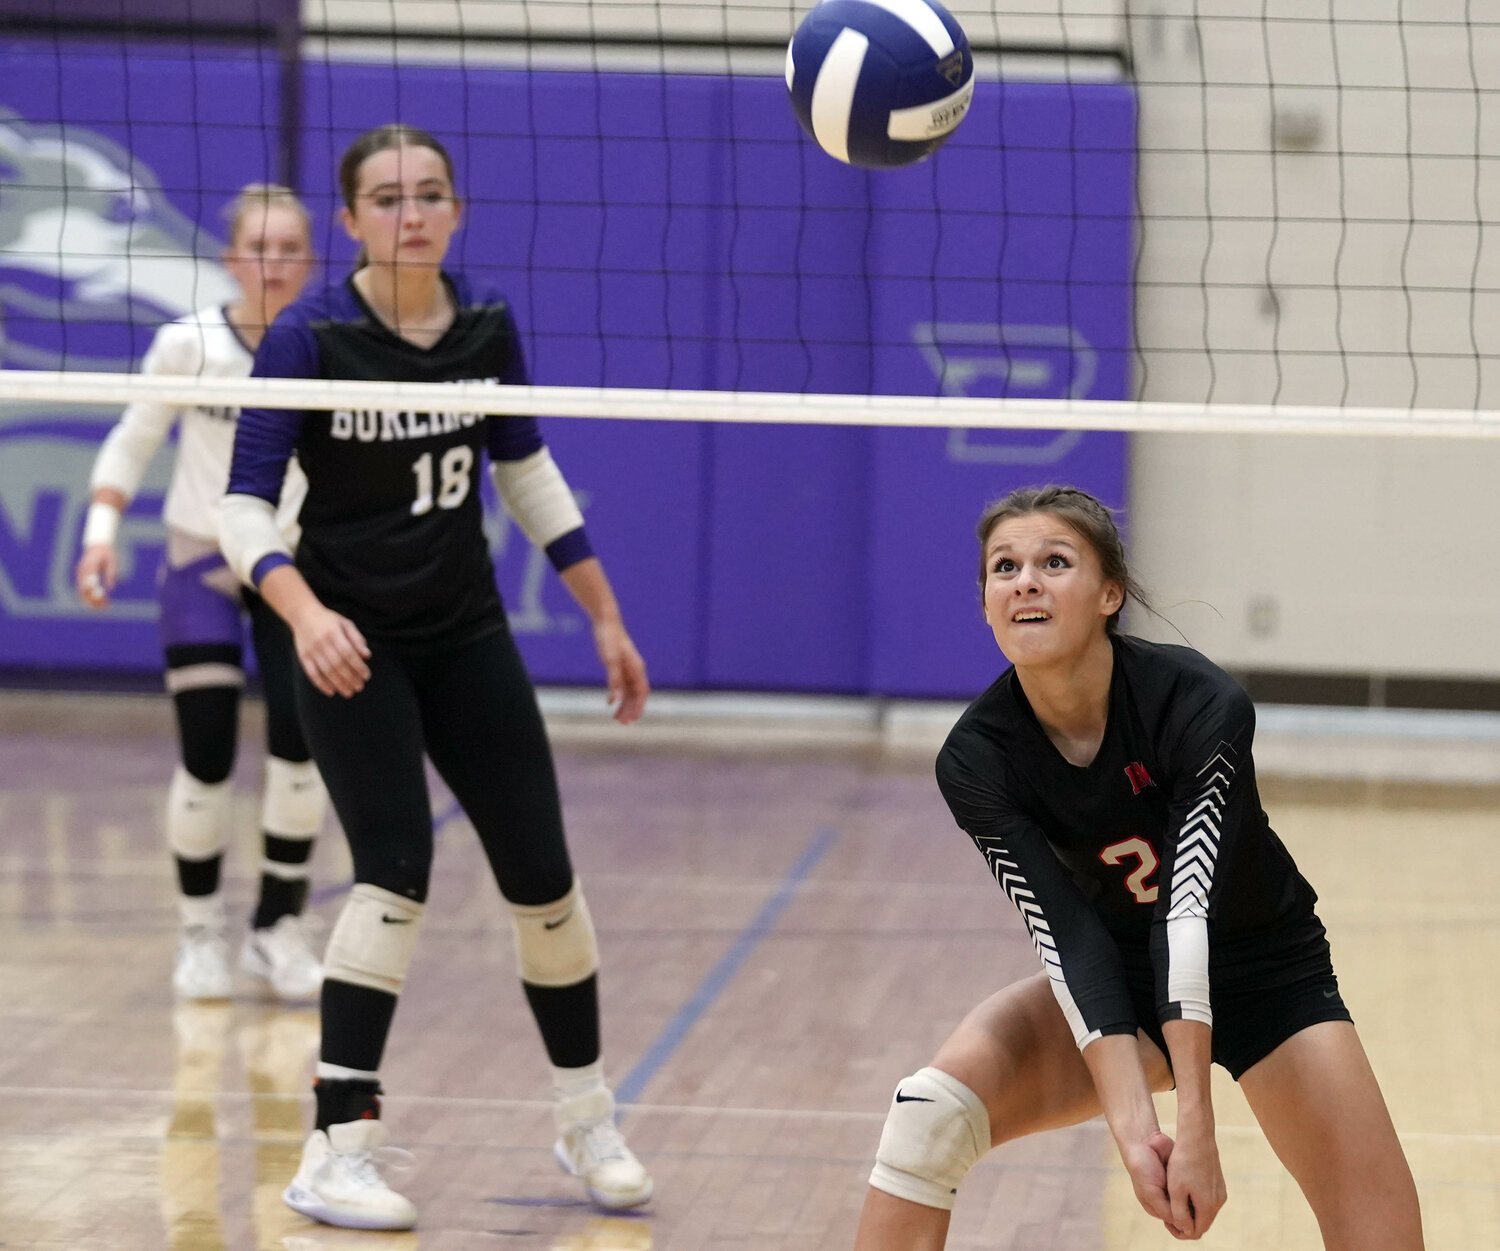 Fort Madison High School's Mara Smith (2) keeps the ball in play during the second set of their match against Burlington High School, Tuesday, September 26 at Burlington's Carl Johannsen Gymnasium.